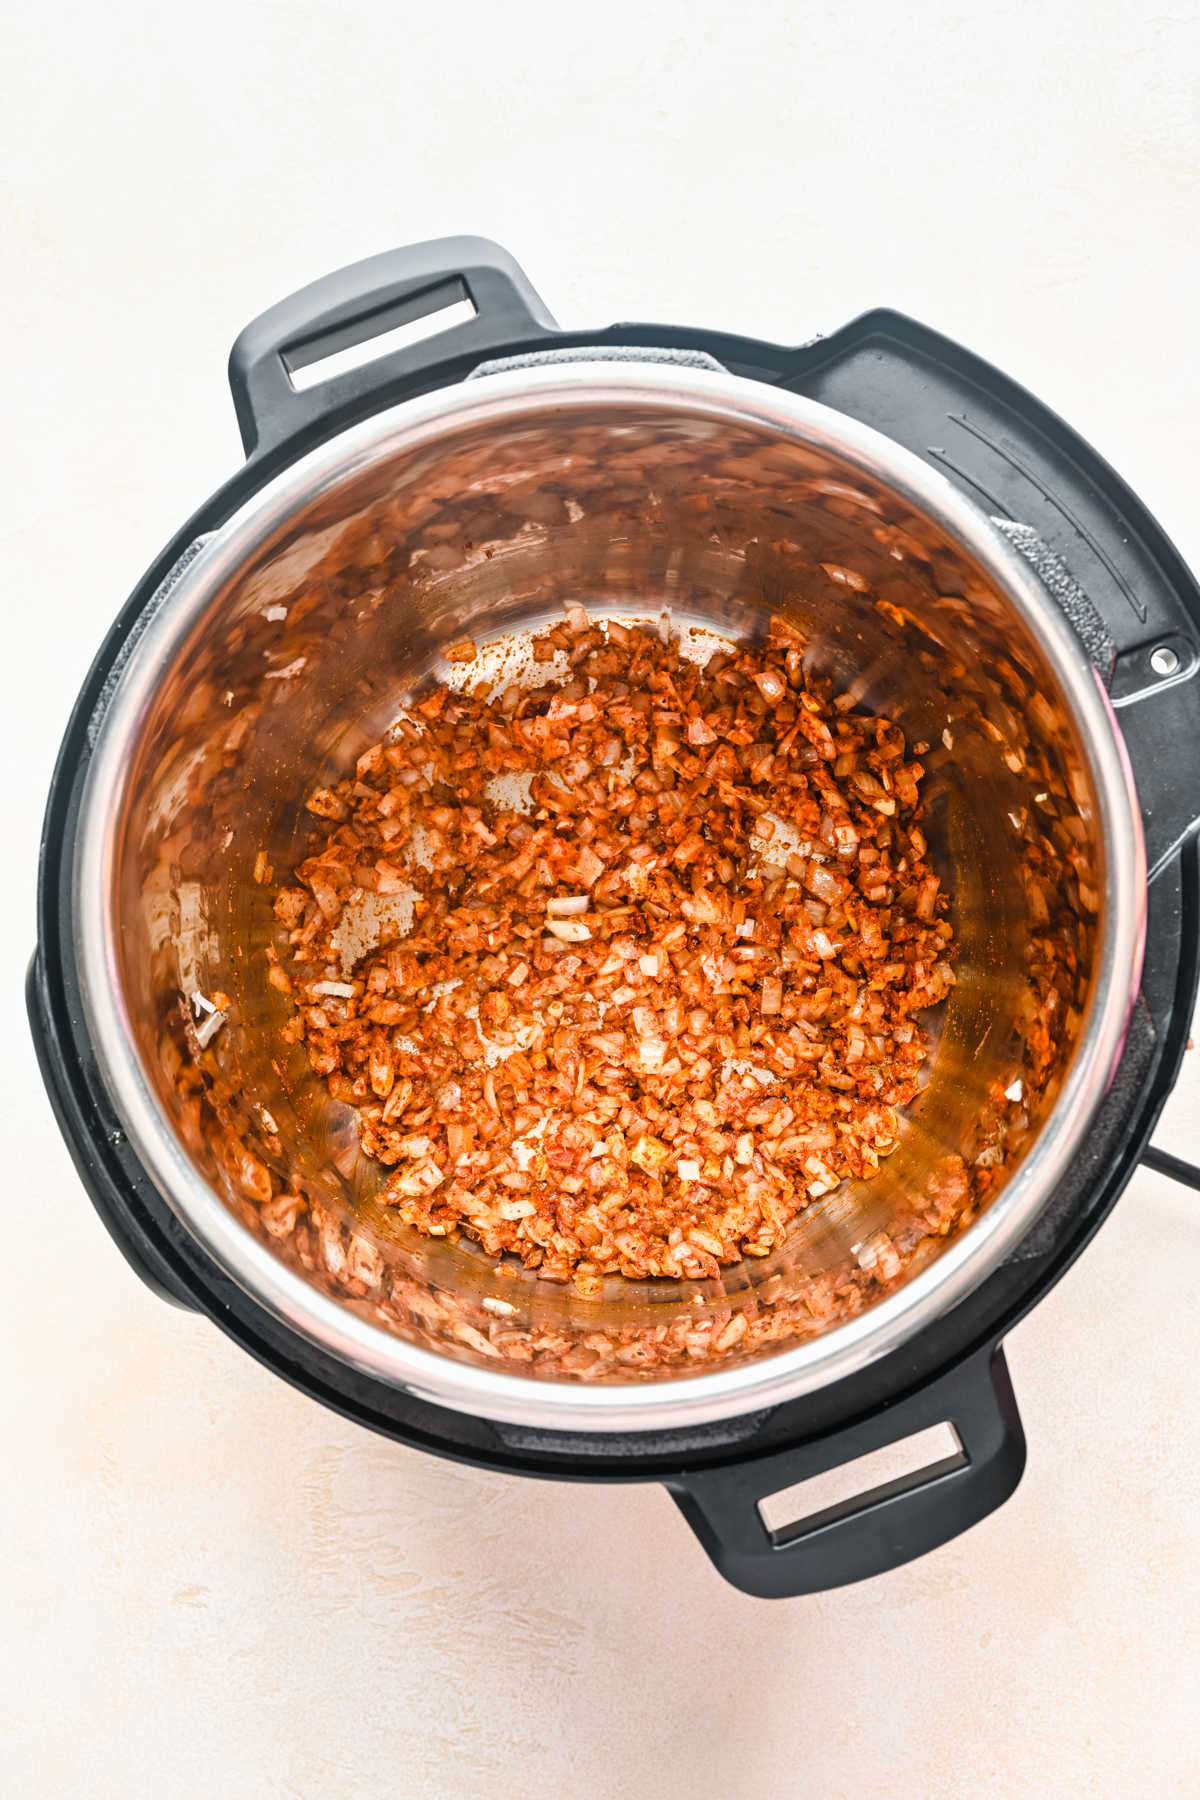 Spices and diced onion in an Instant Pot.